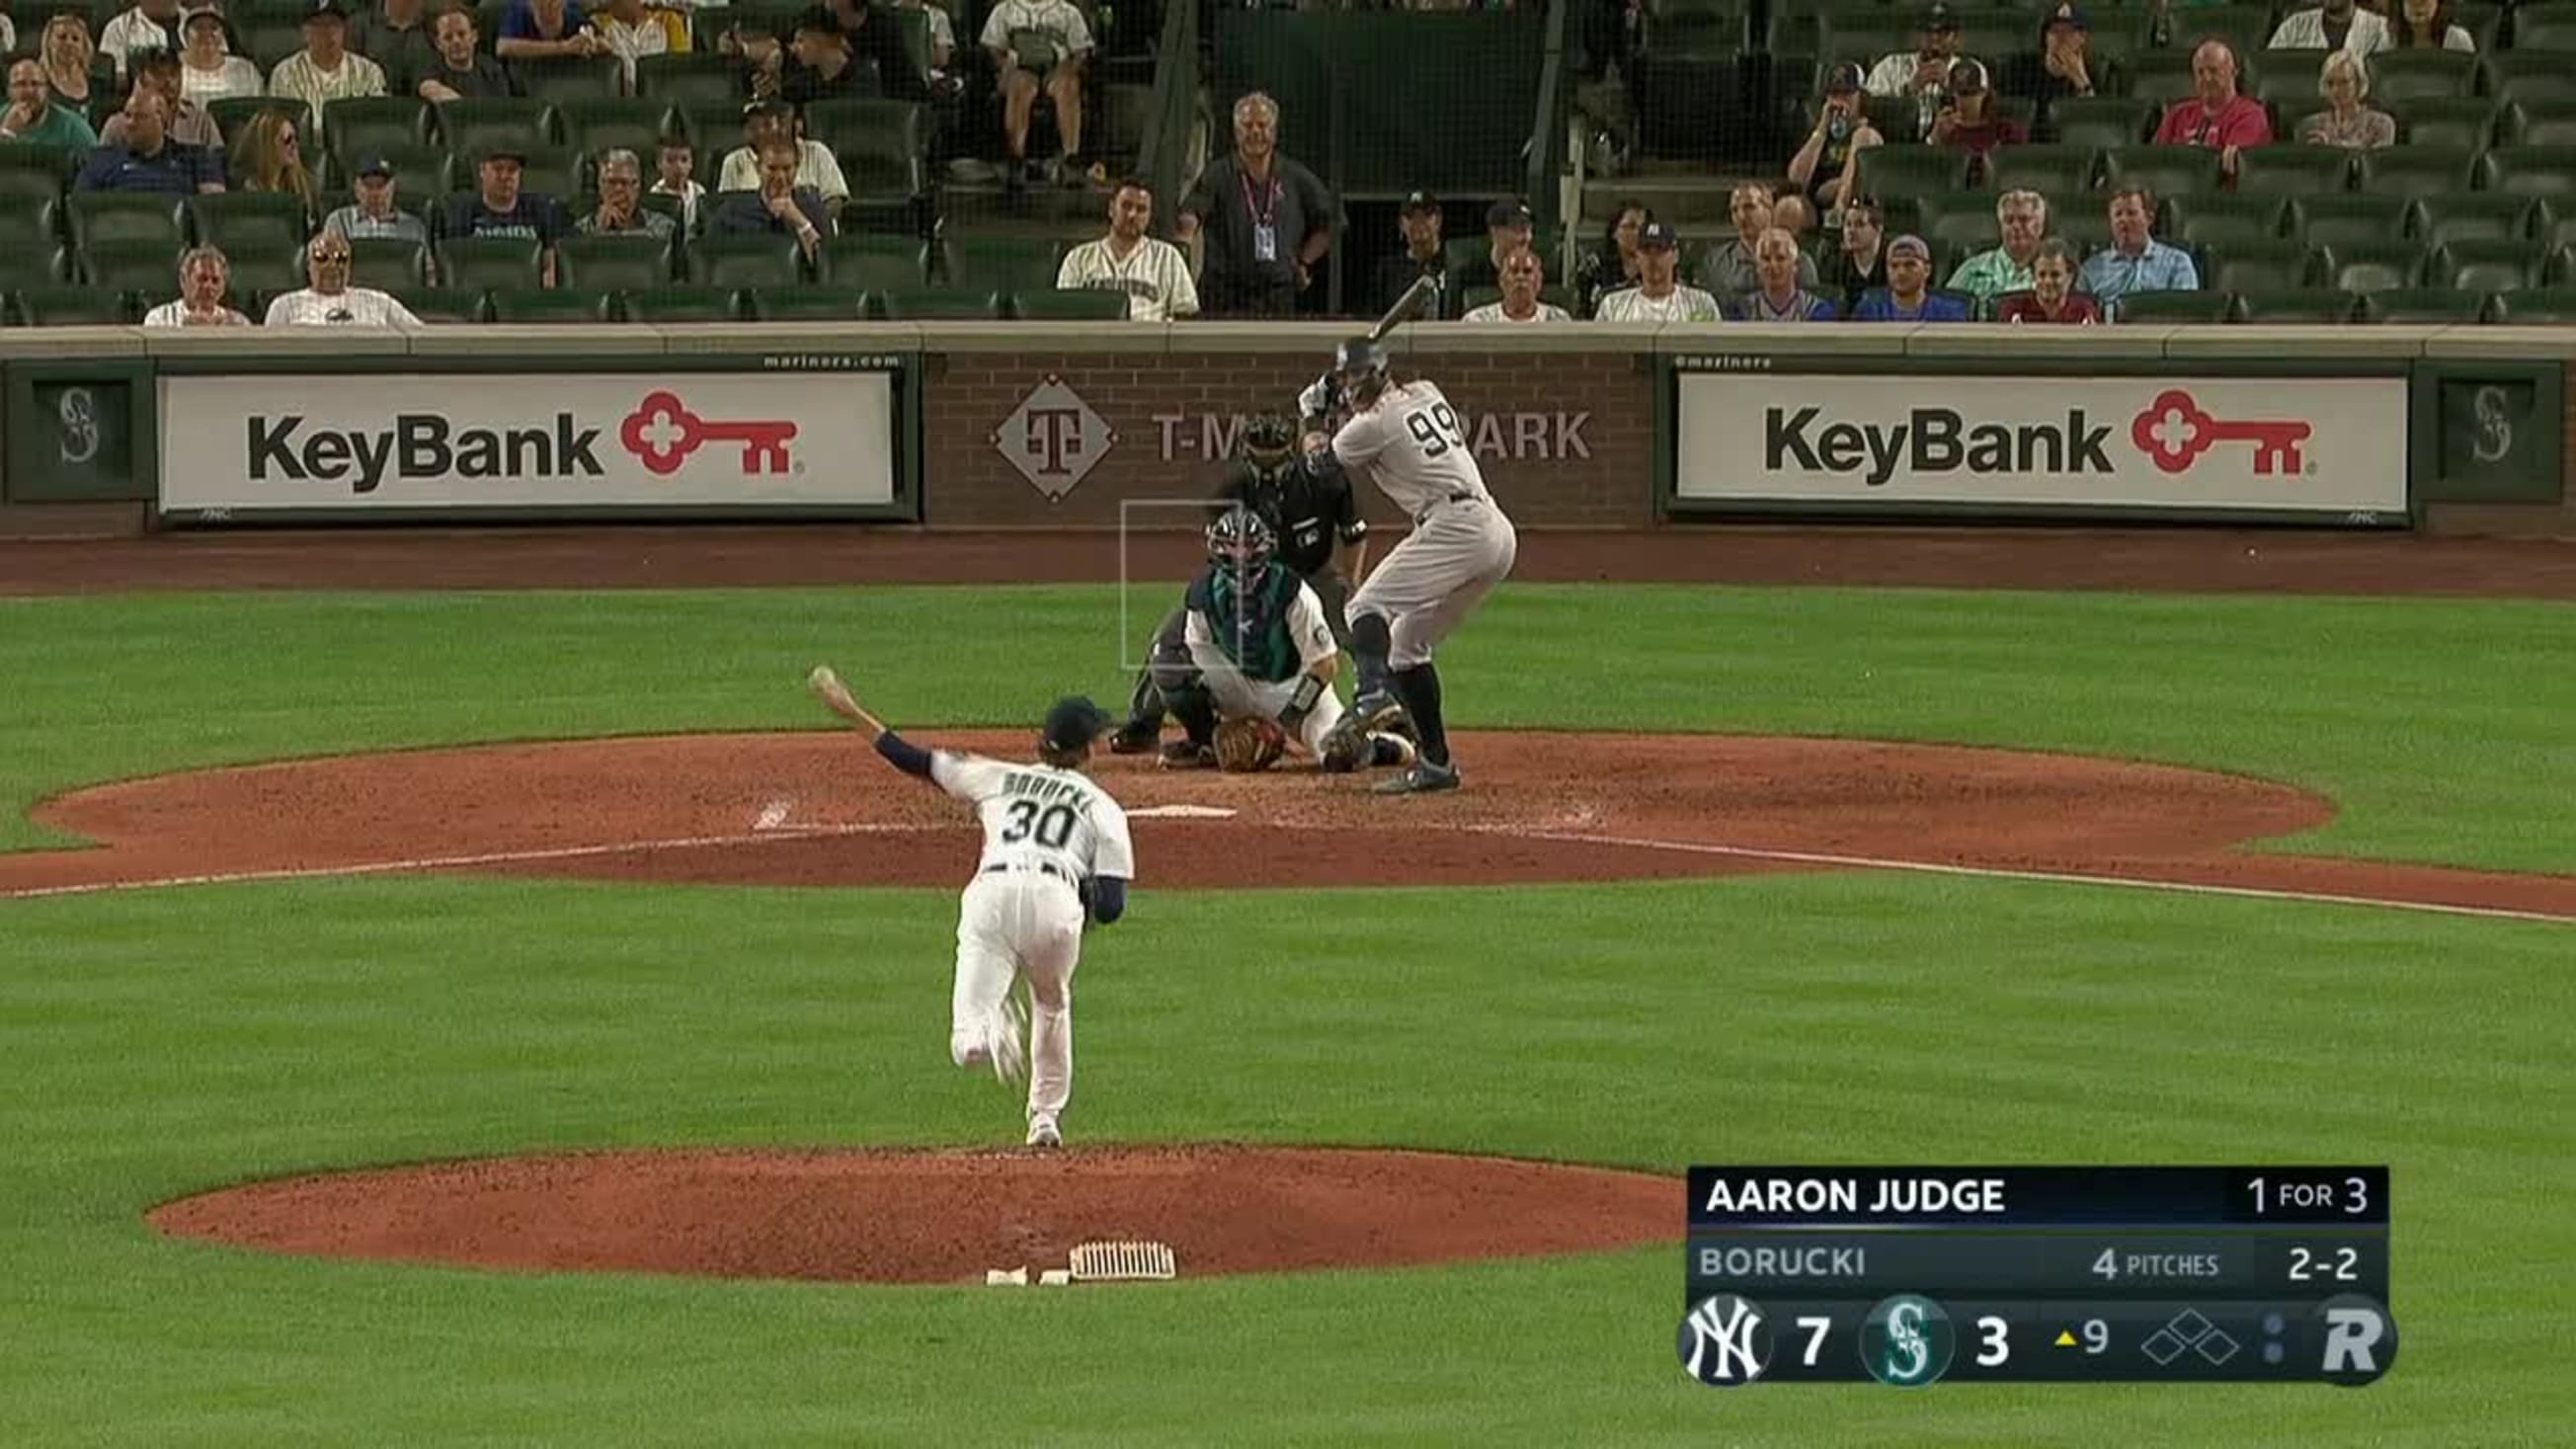 Aaron Judge GOES THE DISTANCE for a 3-run homer at MLB at Field of Dreams!  (Into the cornfield!) 